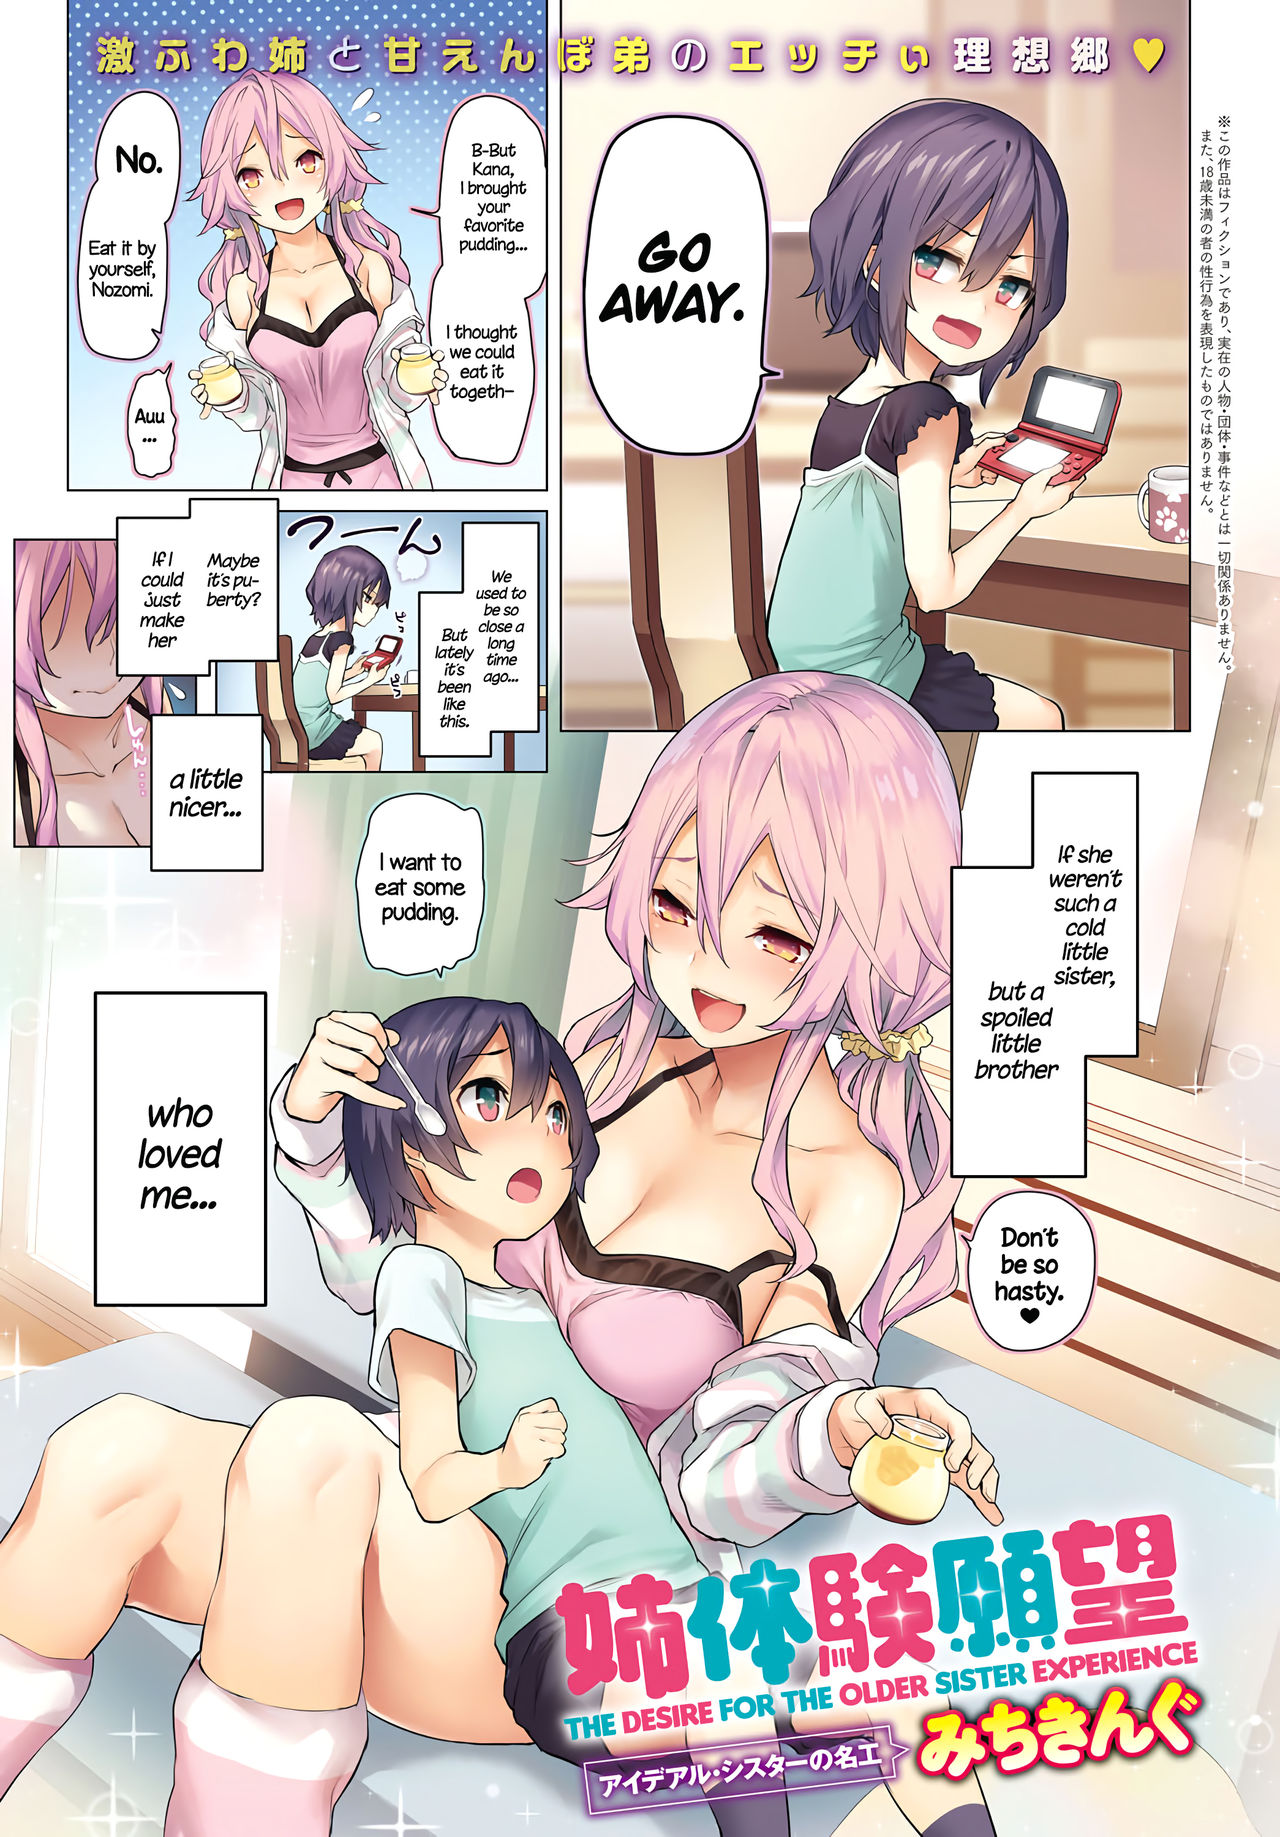 Brother And Sister Hentai - The Desire For The Older Sister Experience - Porn Cartoon Comics